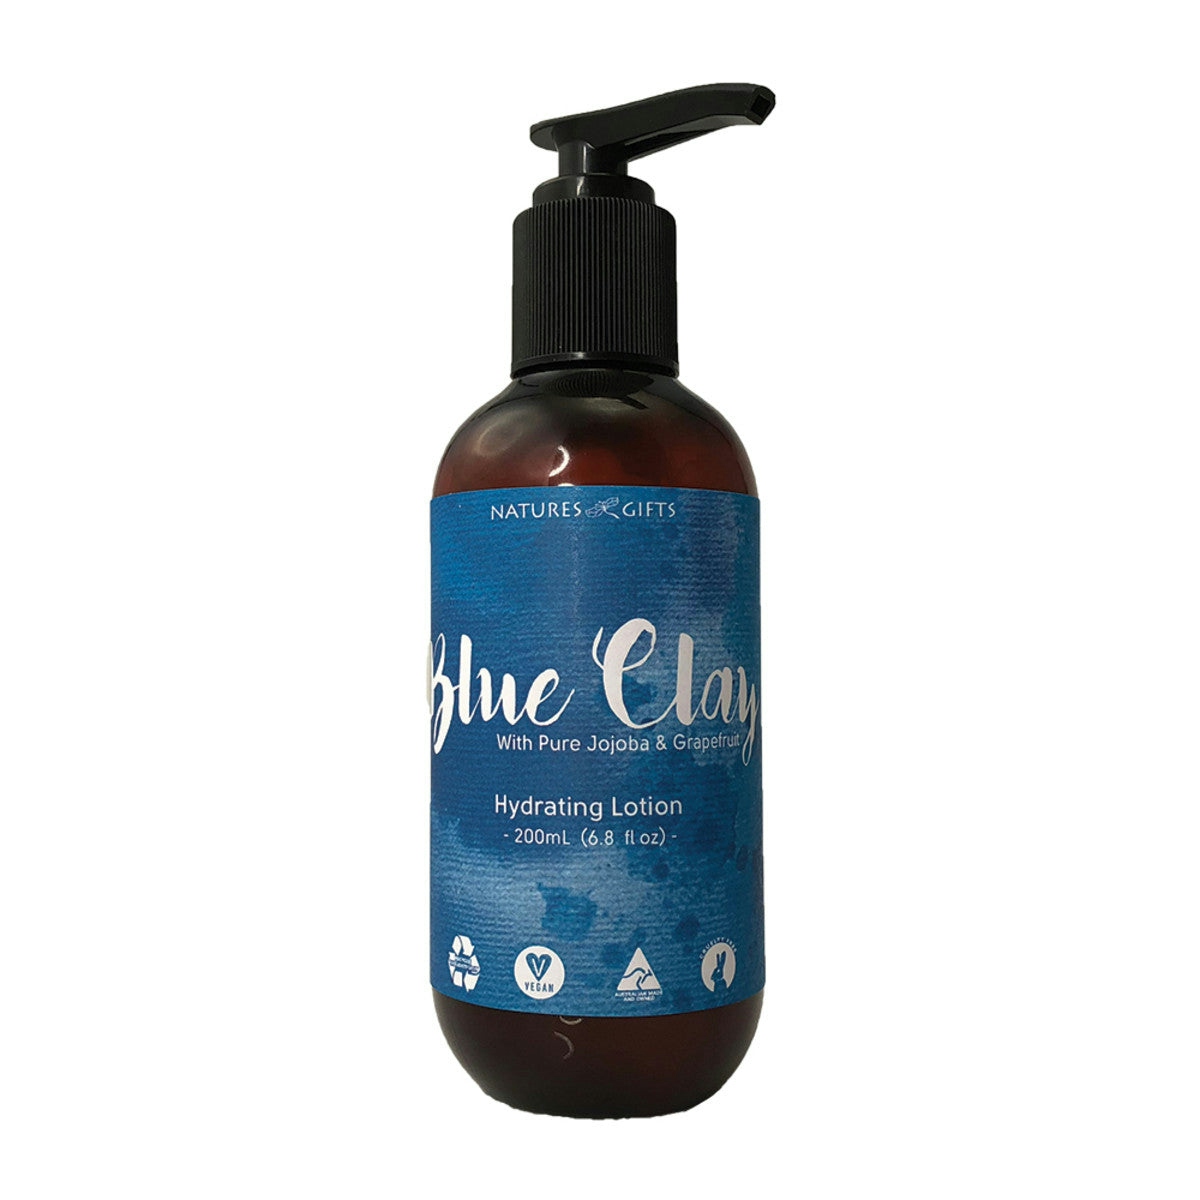 image of Clover Fields Natures Gifts Blue Clay with Jojoba & Grapefruit Hydrating Lotion on white background 